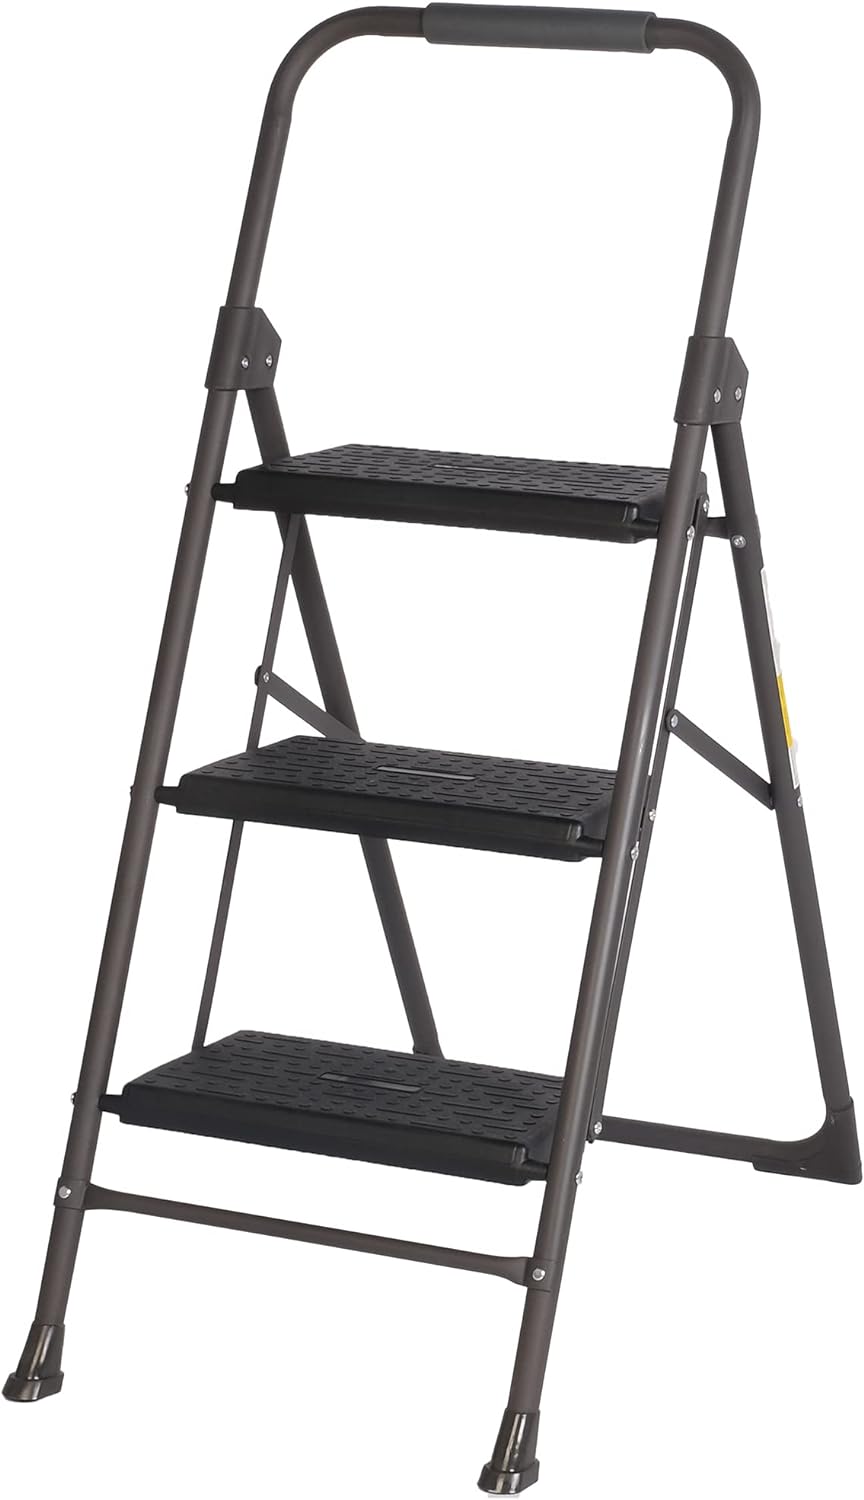 3 Step Ladder, Folding Step Stool for Adults with Handgrip Portable Lightweight Step Ladder